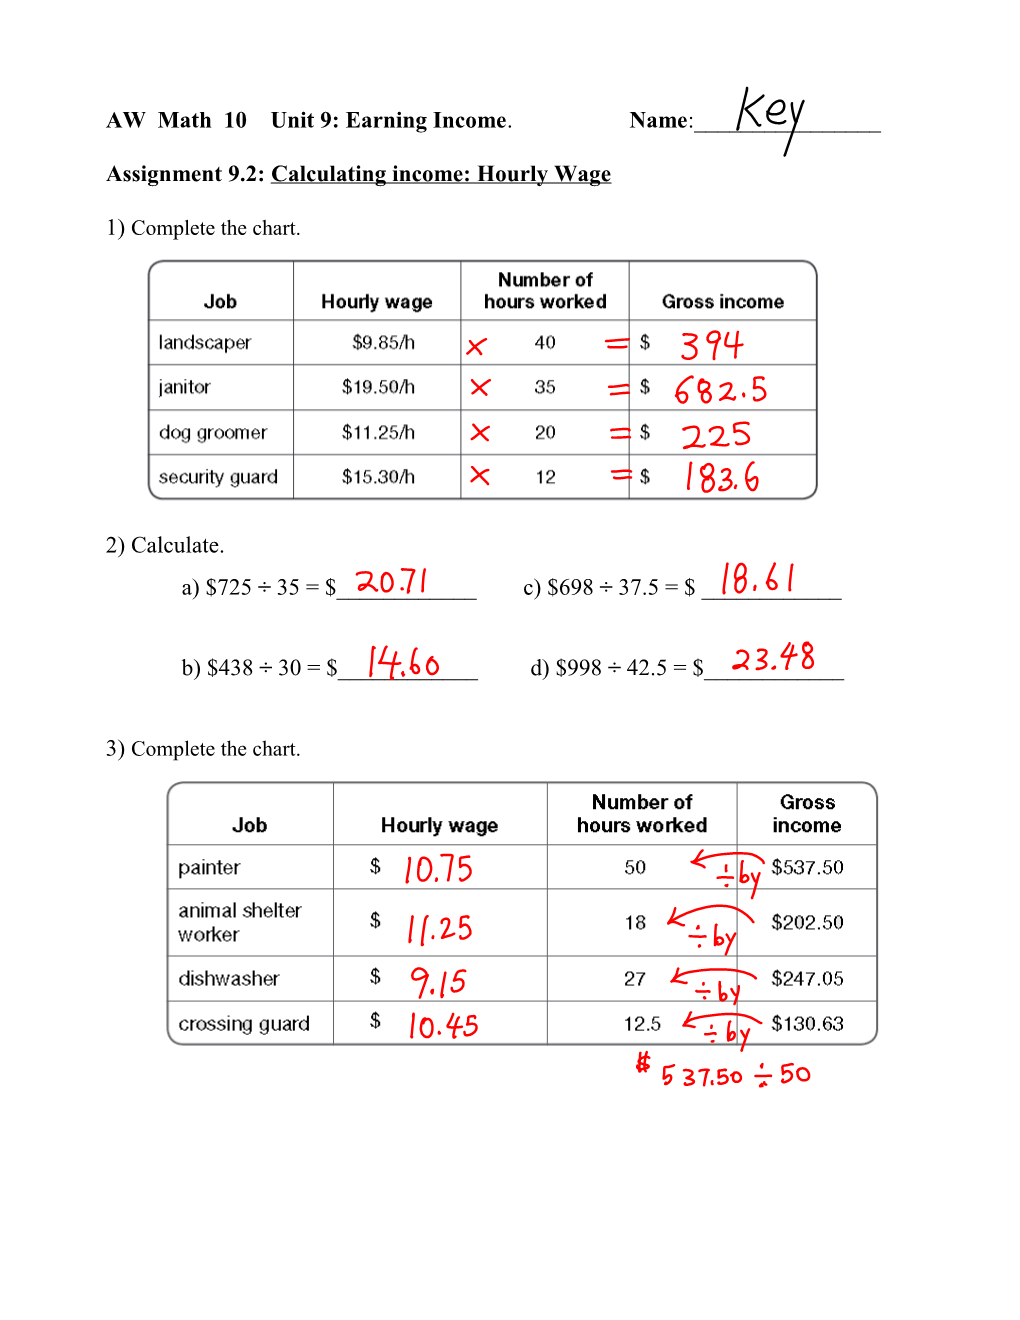 AW Math 10 Unit 9: Earning Income